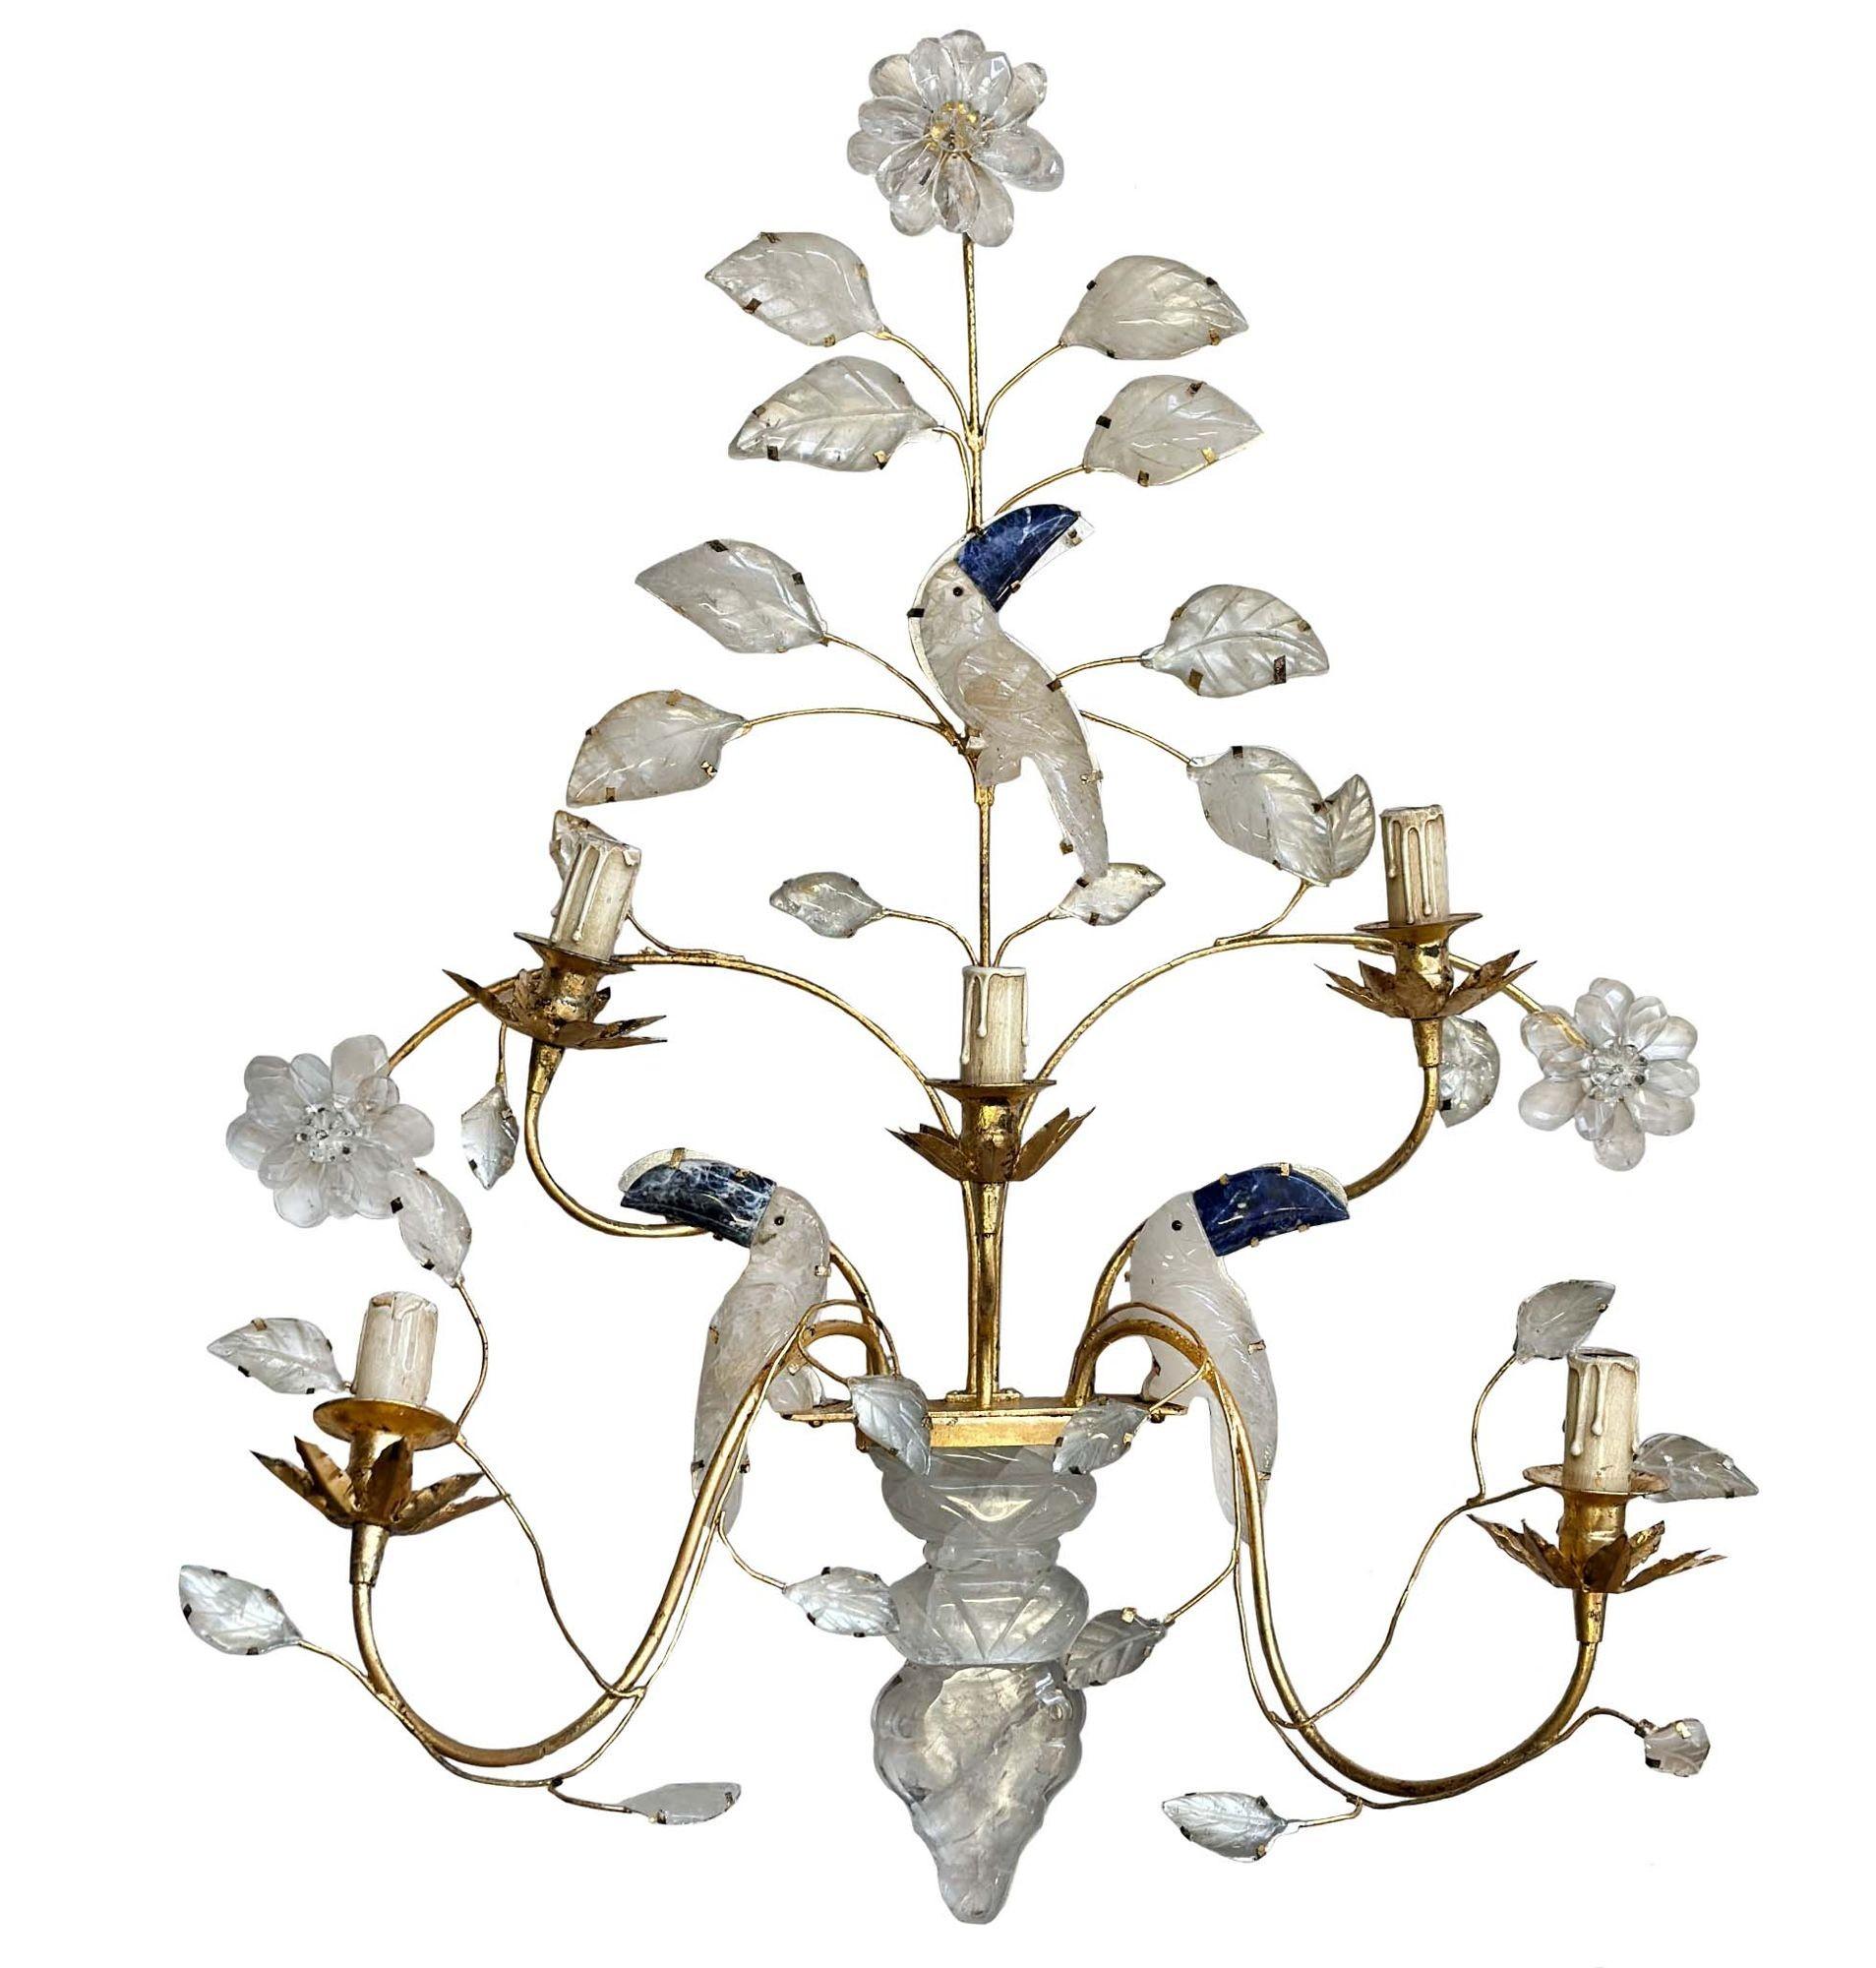 Pair of elegant rock crystal and lapis lazuli stone sconces with toucan and flower figures. Includes five candelabra socket lights. Made in France, c. 1950's.
Dimensions:
32